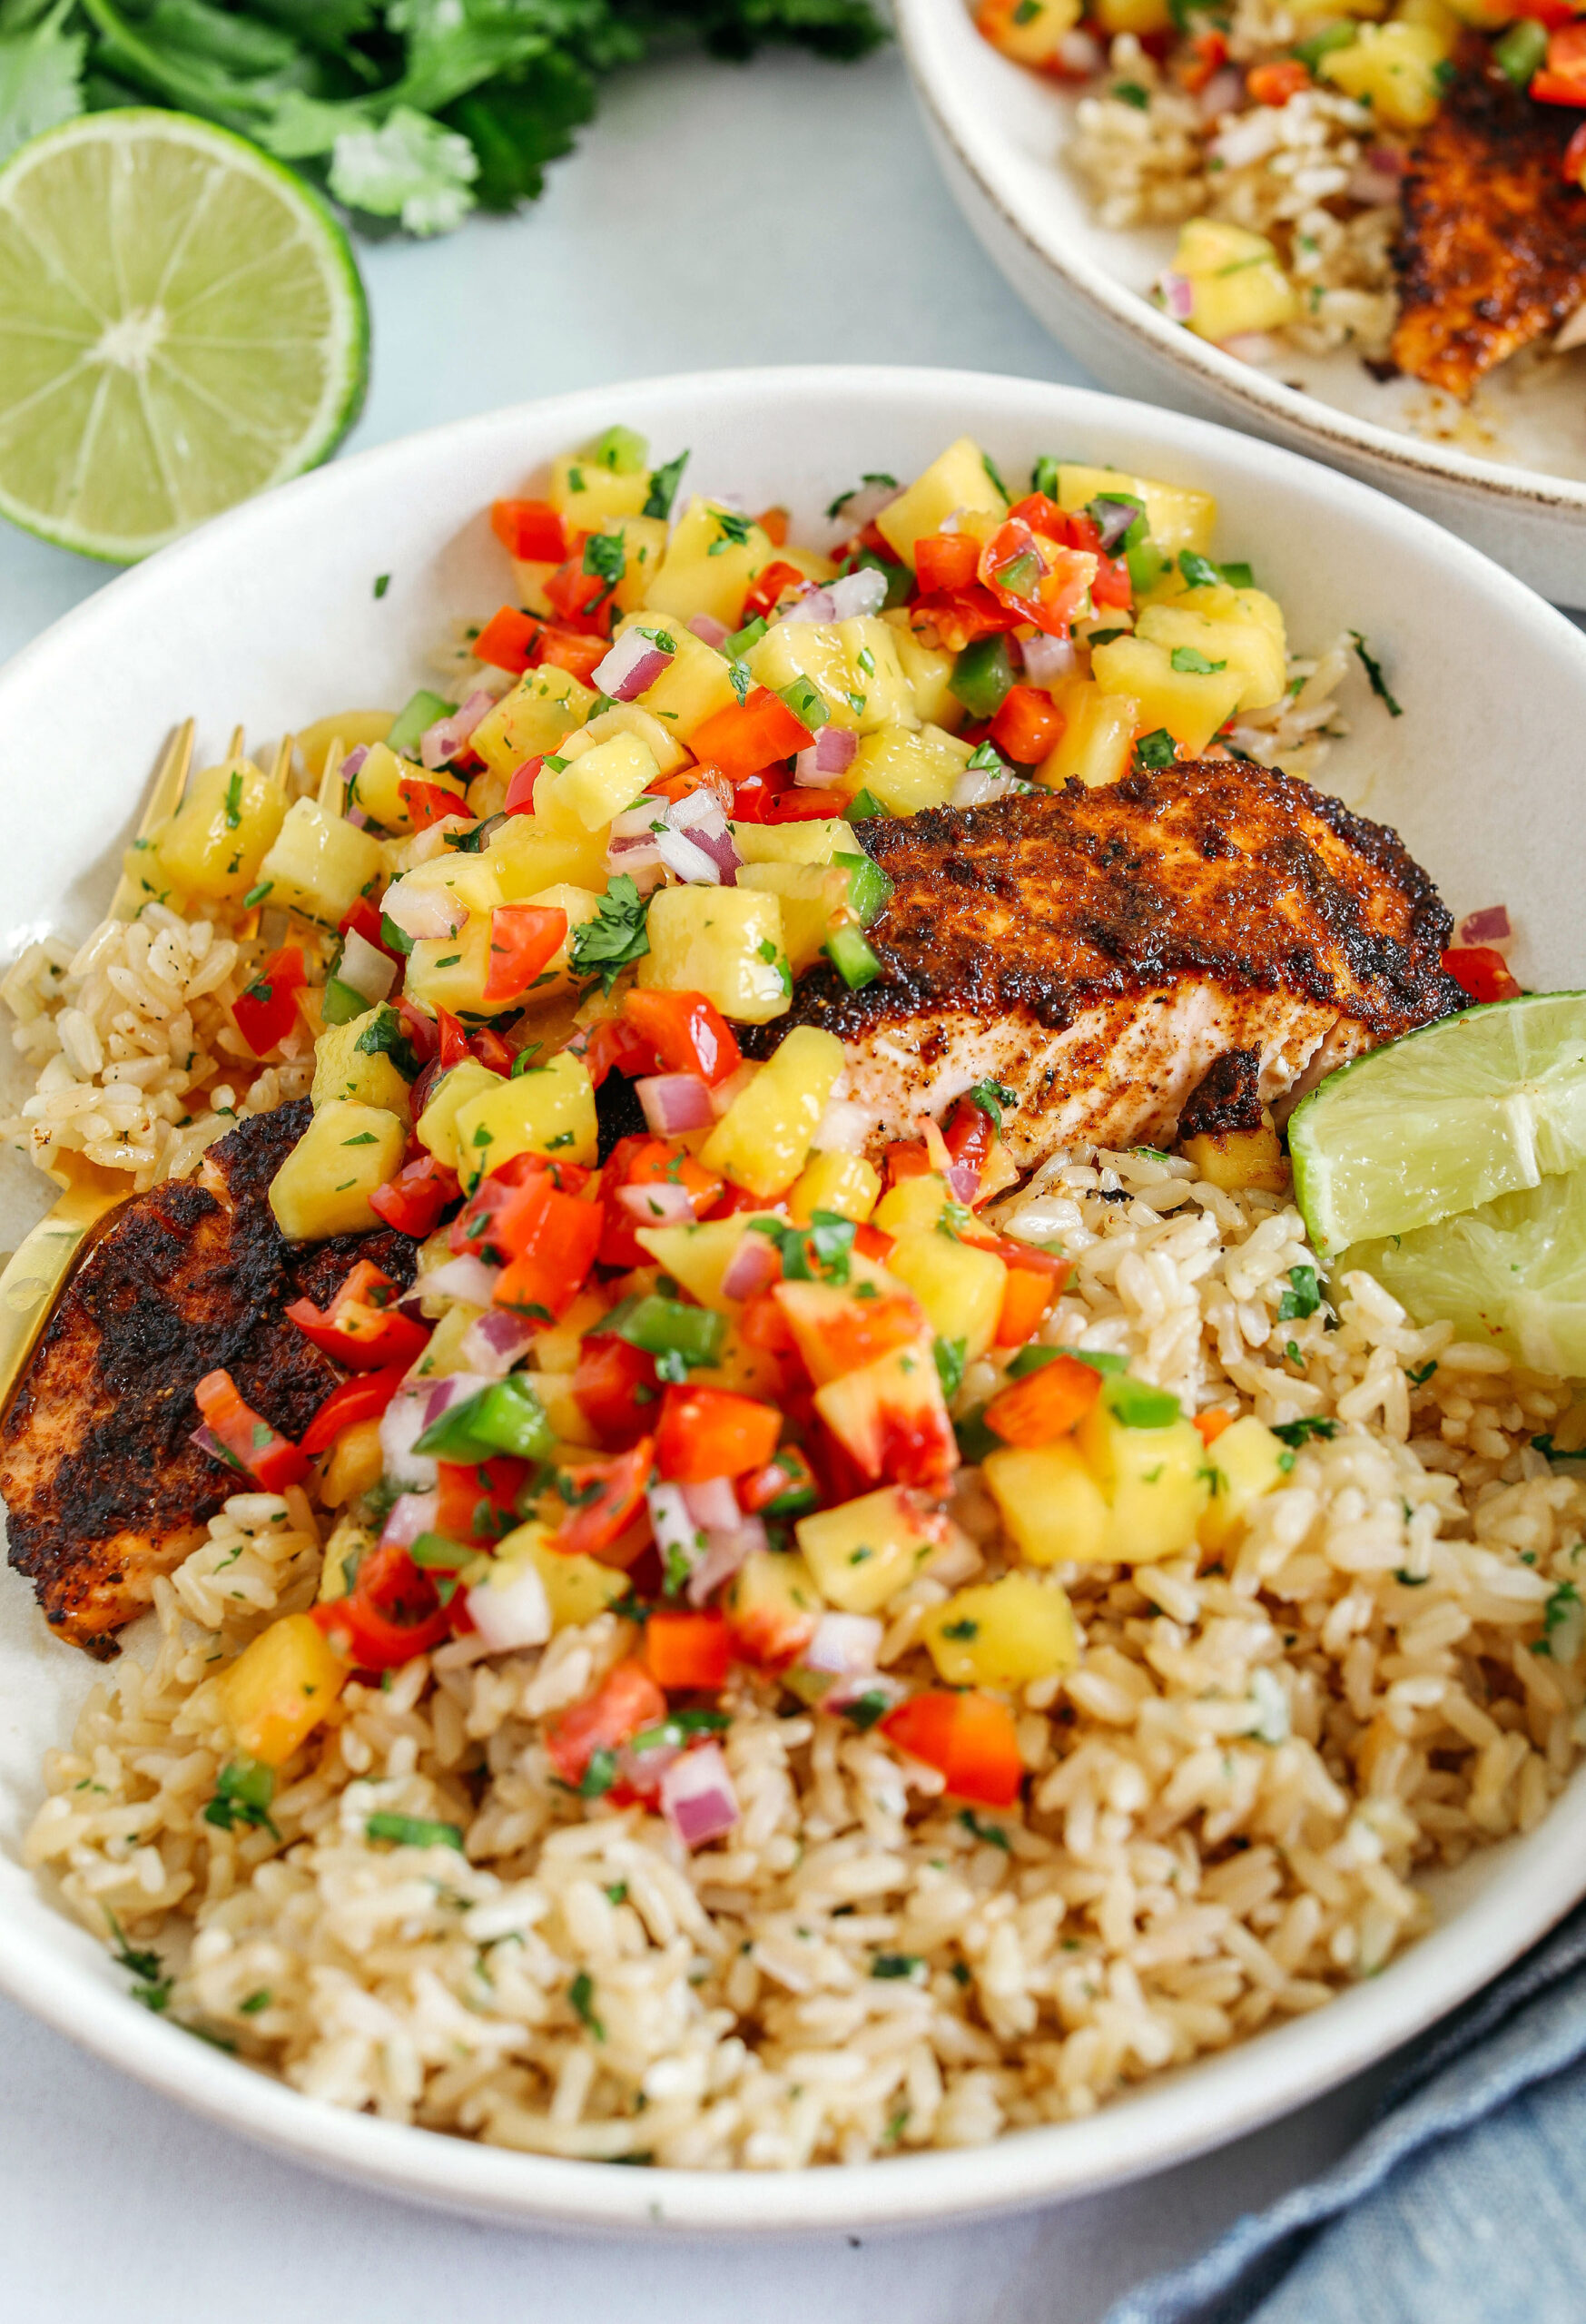 This tender flaky Chili Lime Salmon is coated in a delicious combination of spices and fresh lime juice for a mouthful of flavor!  Pair it with fresh mango salsa and brown rice for the perfect healthy dinner!